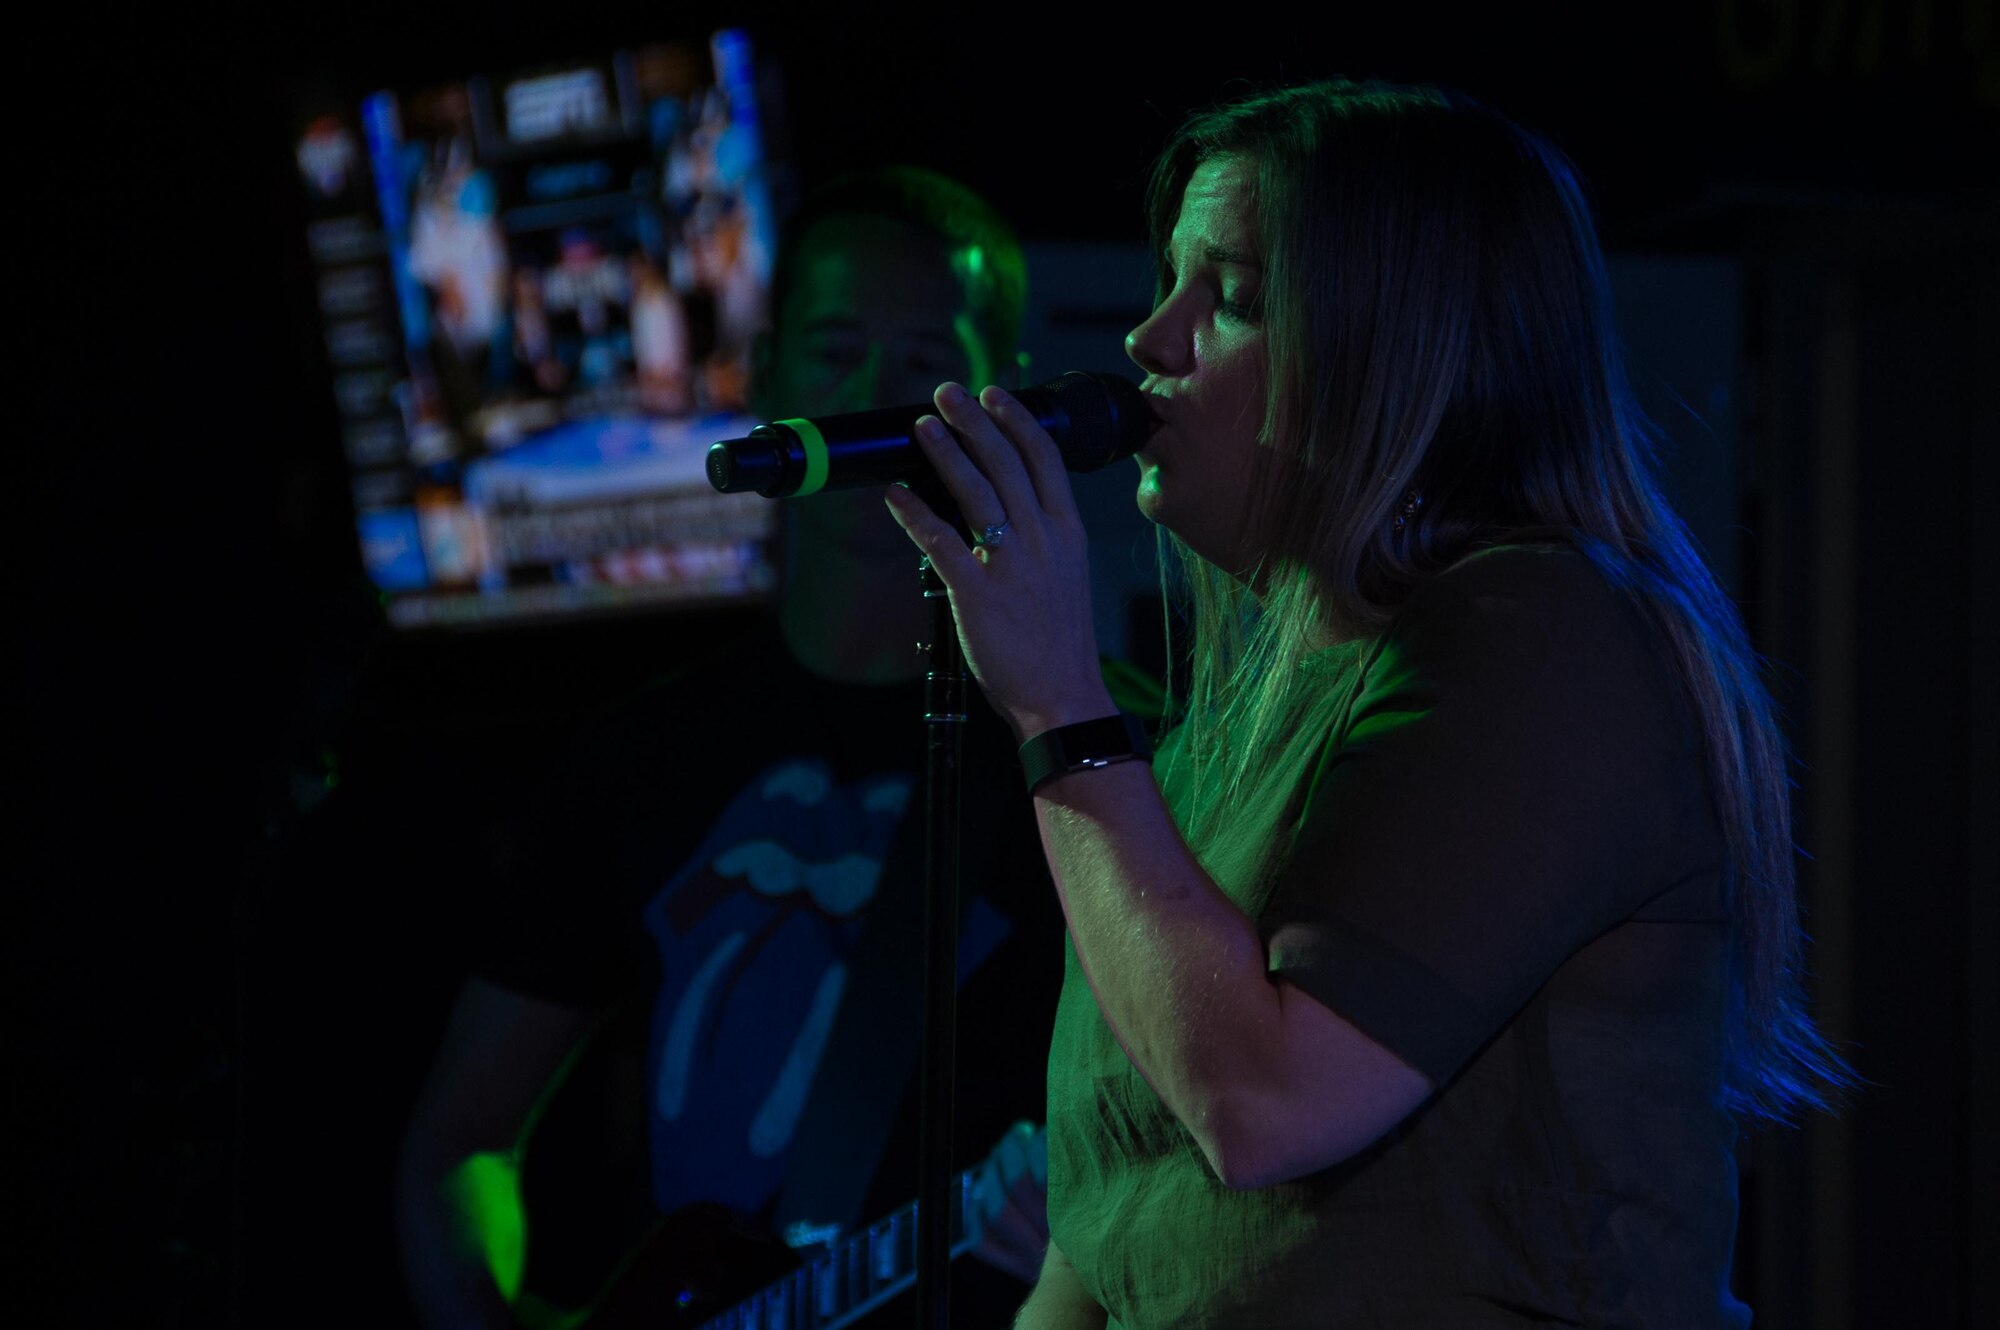 Staff Sgt. Melissa Lackore, one of the lead vocalists for the AFCENT Band, sings into the microphone during an AFCENT Band performance at an undisclosed location in Southwest Asia, August 7, 2017. The band’s high energy show and follow-on live band karaoke brought 386th Air Expeditionary Wing members and joint Coalition partners together for two nights of fun, laughter and fellowship. (U.S. Air Force photo by 1st Lt. Rashard Coaxum)